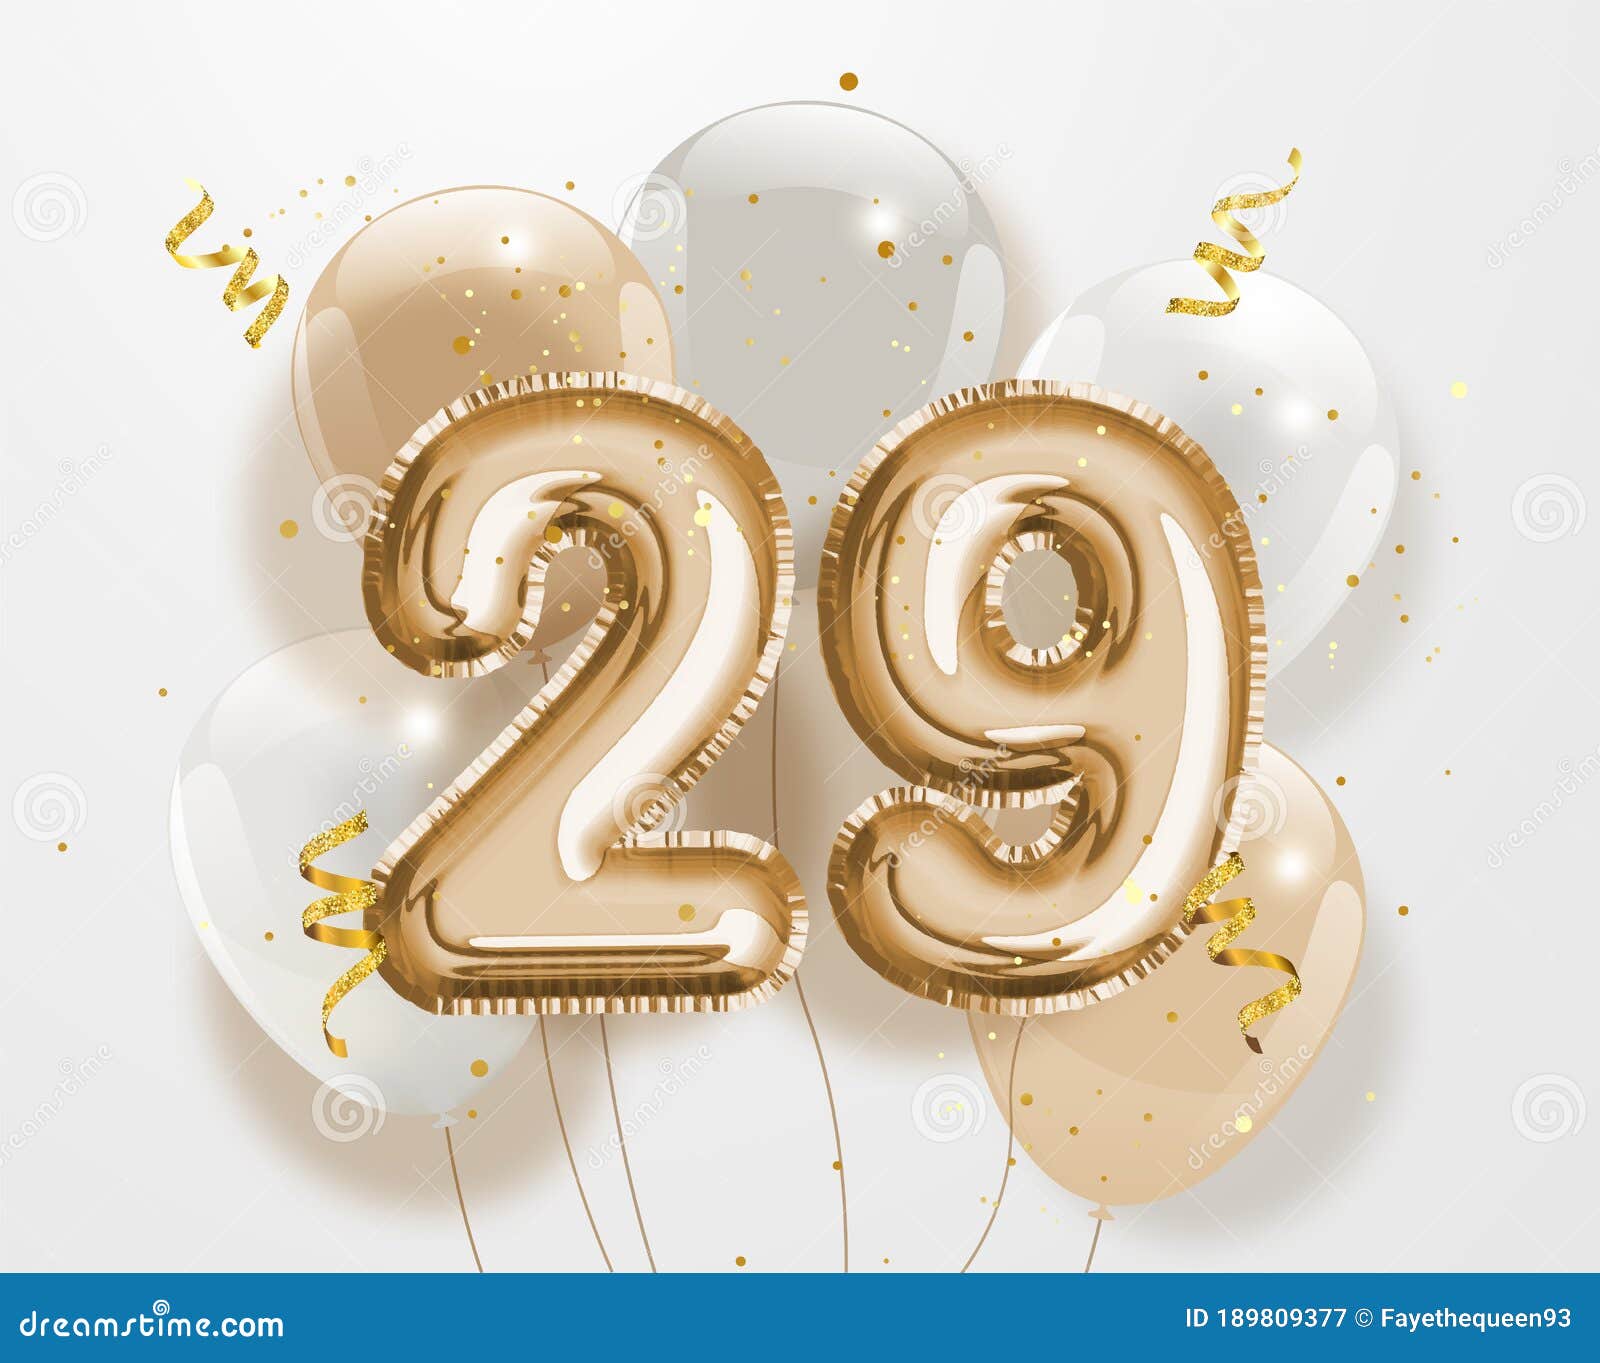 Happy 29th Birthday Gold Foil Balloon Greeting Background. Stock Vector - Illustration of card, anniversary: 189809377